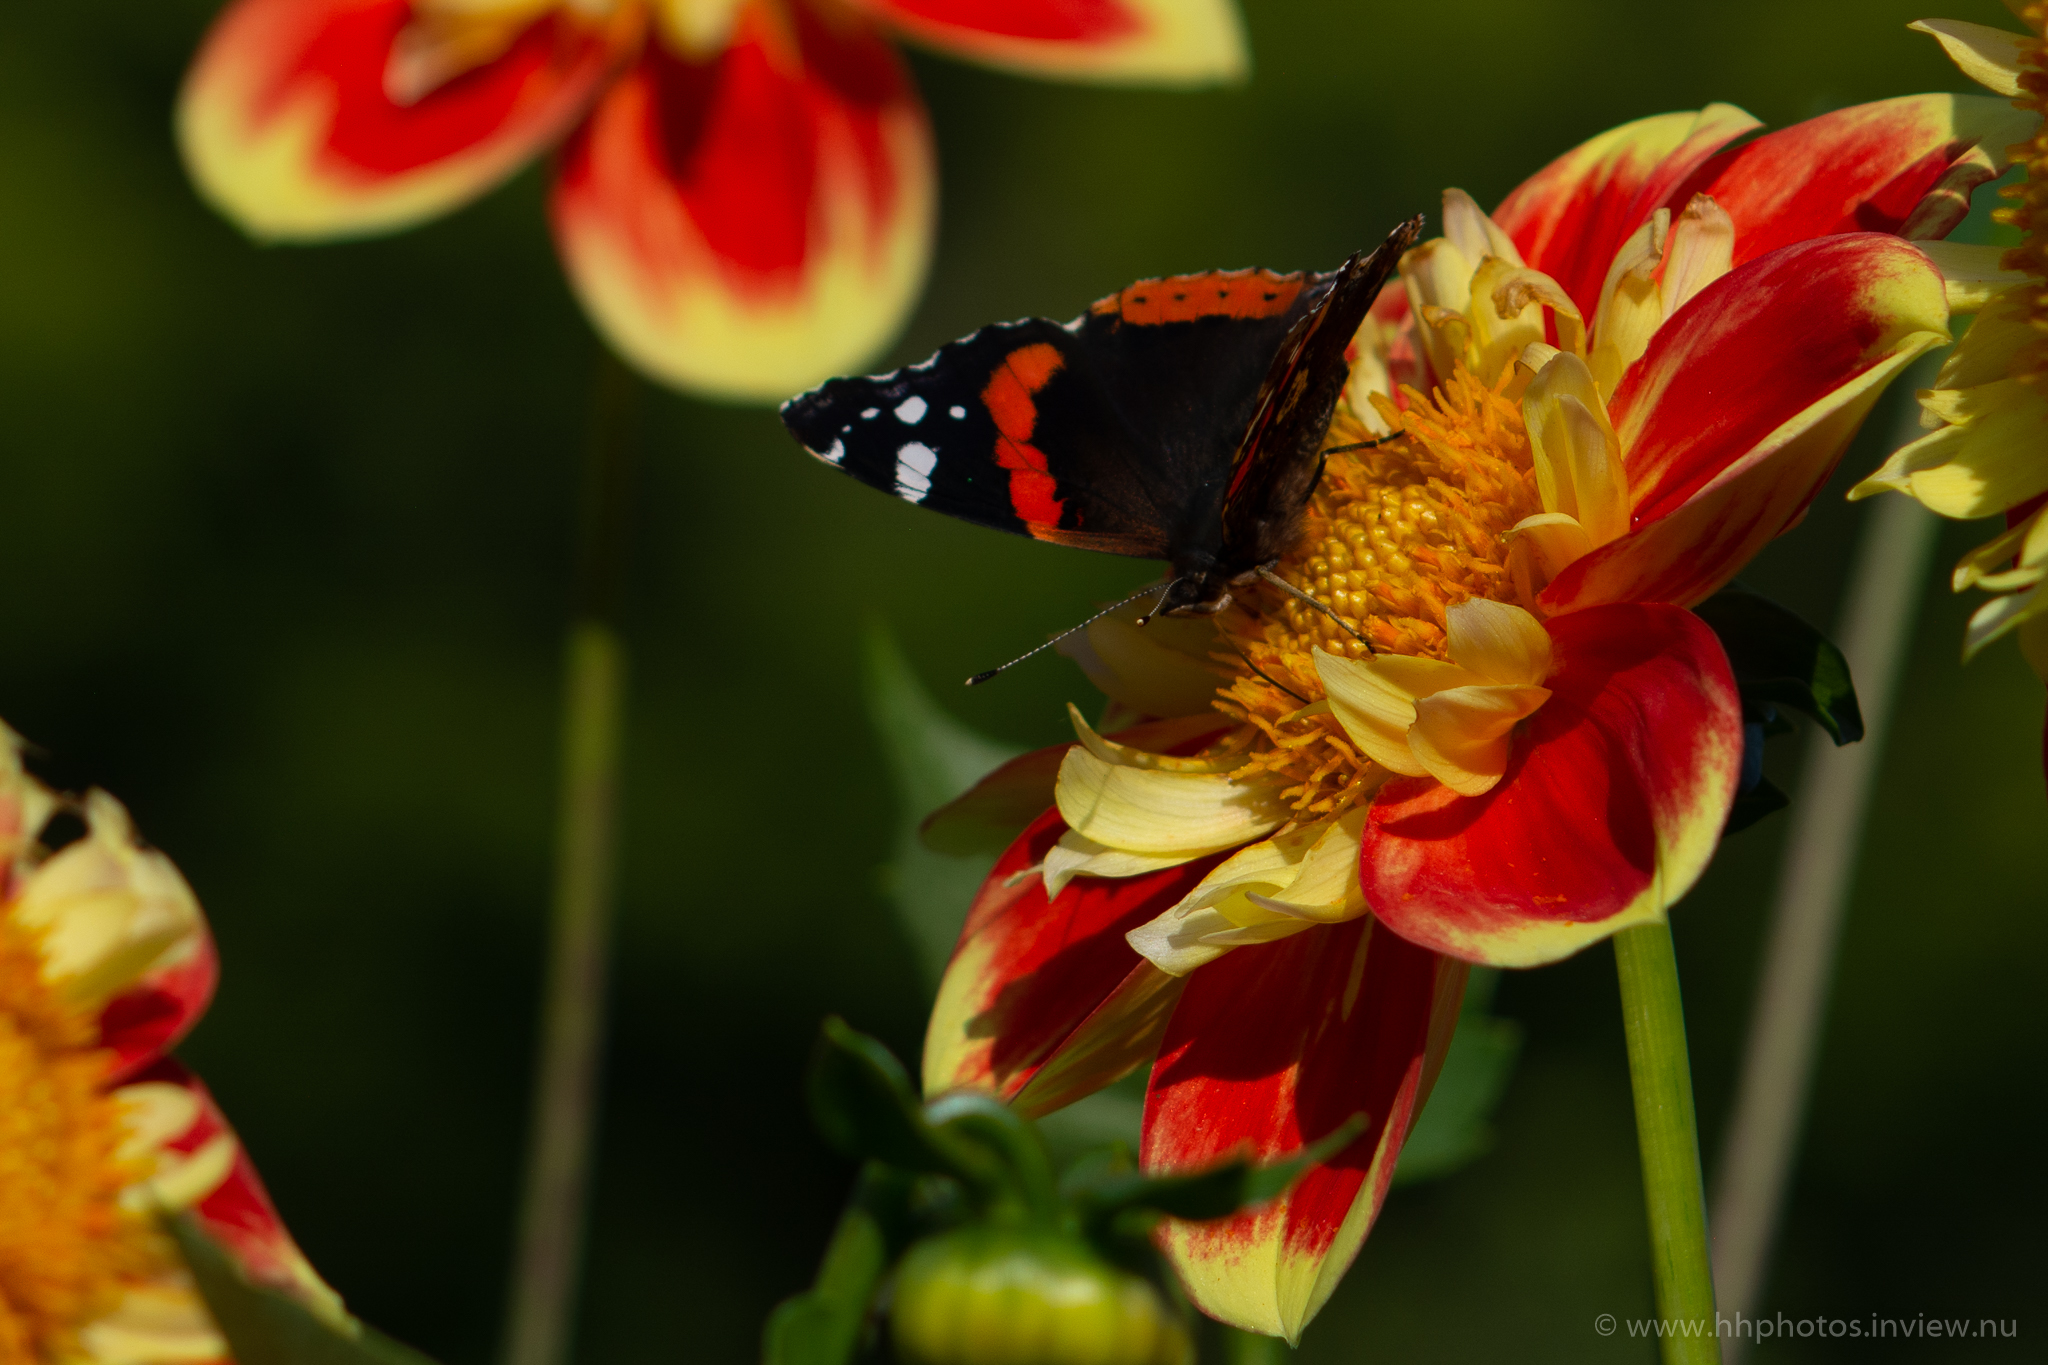 Amiral / Red admiral